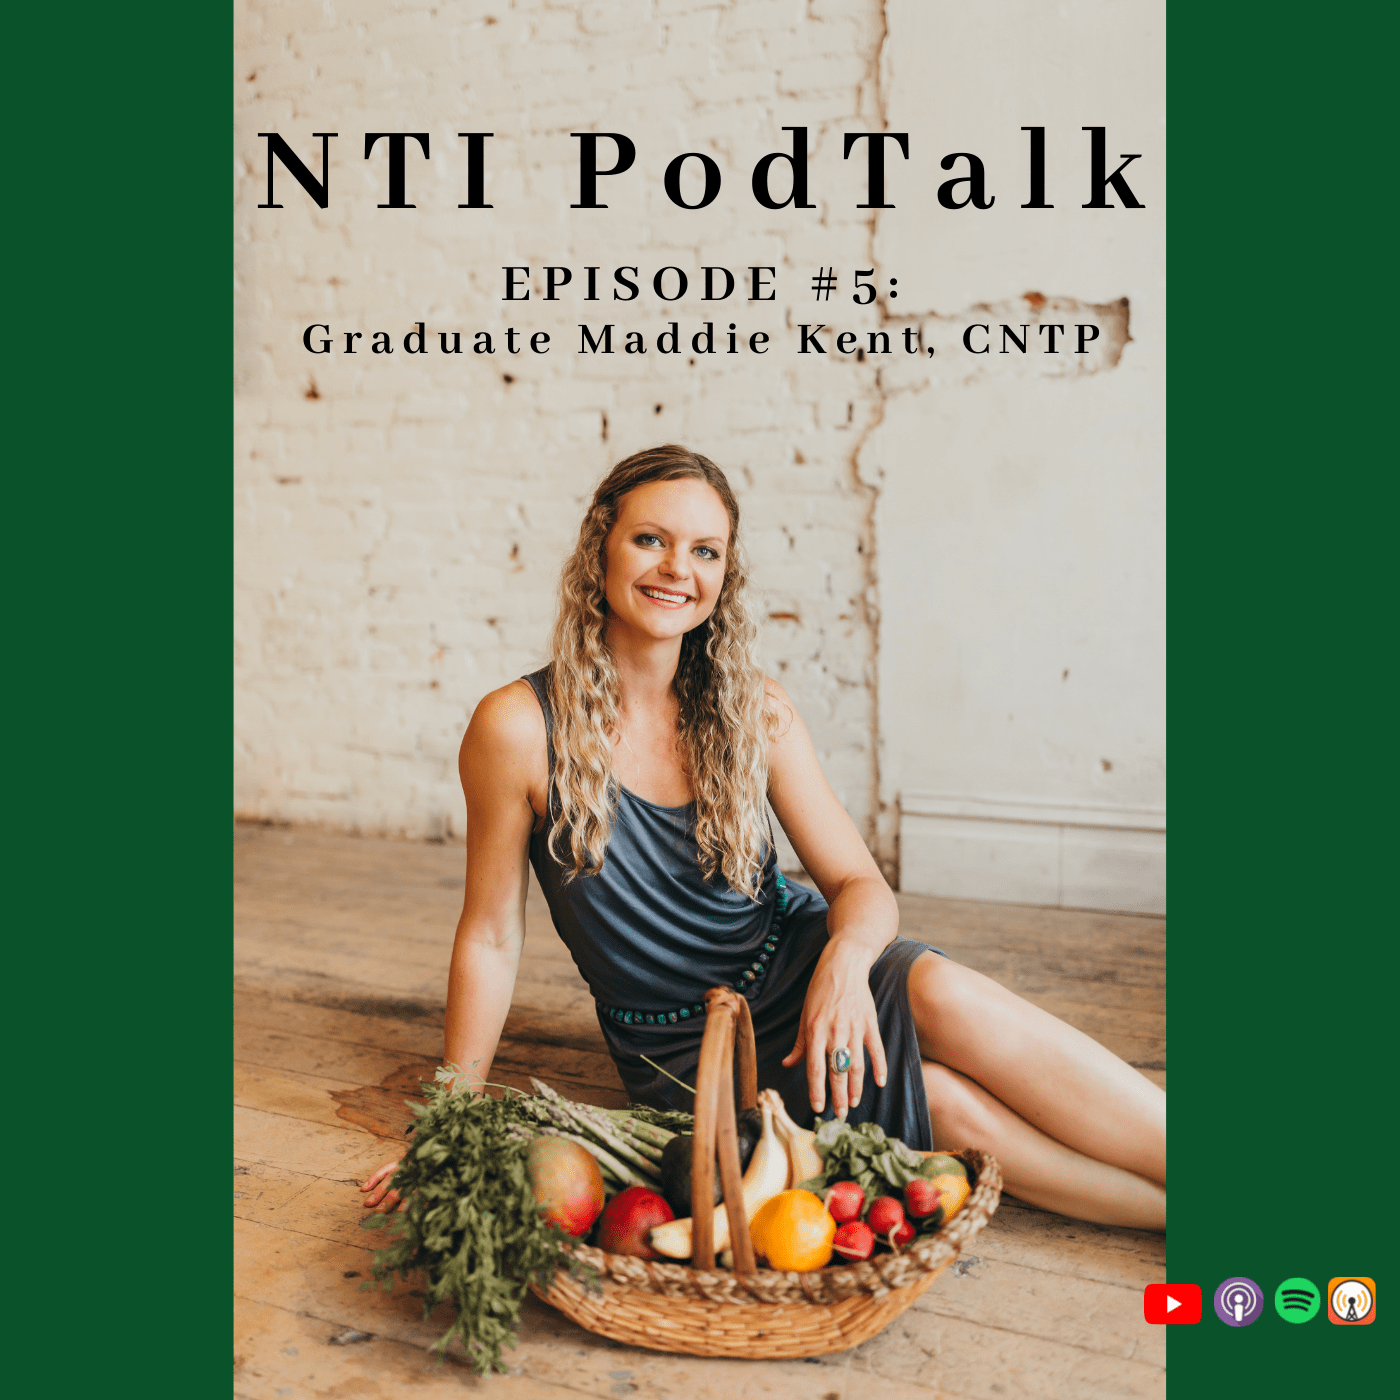 Featured image for “NTI PodTalk with Graduate Madeline Kent”